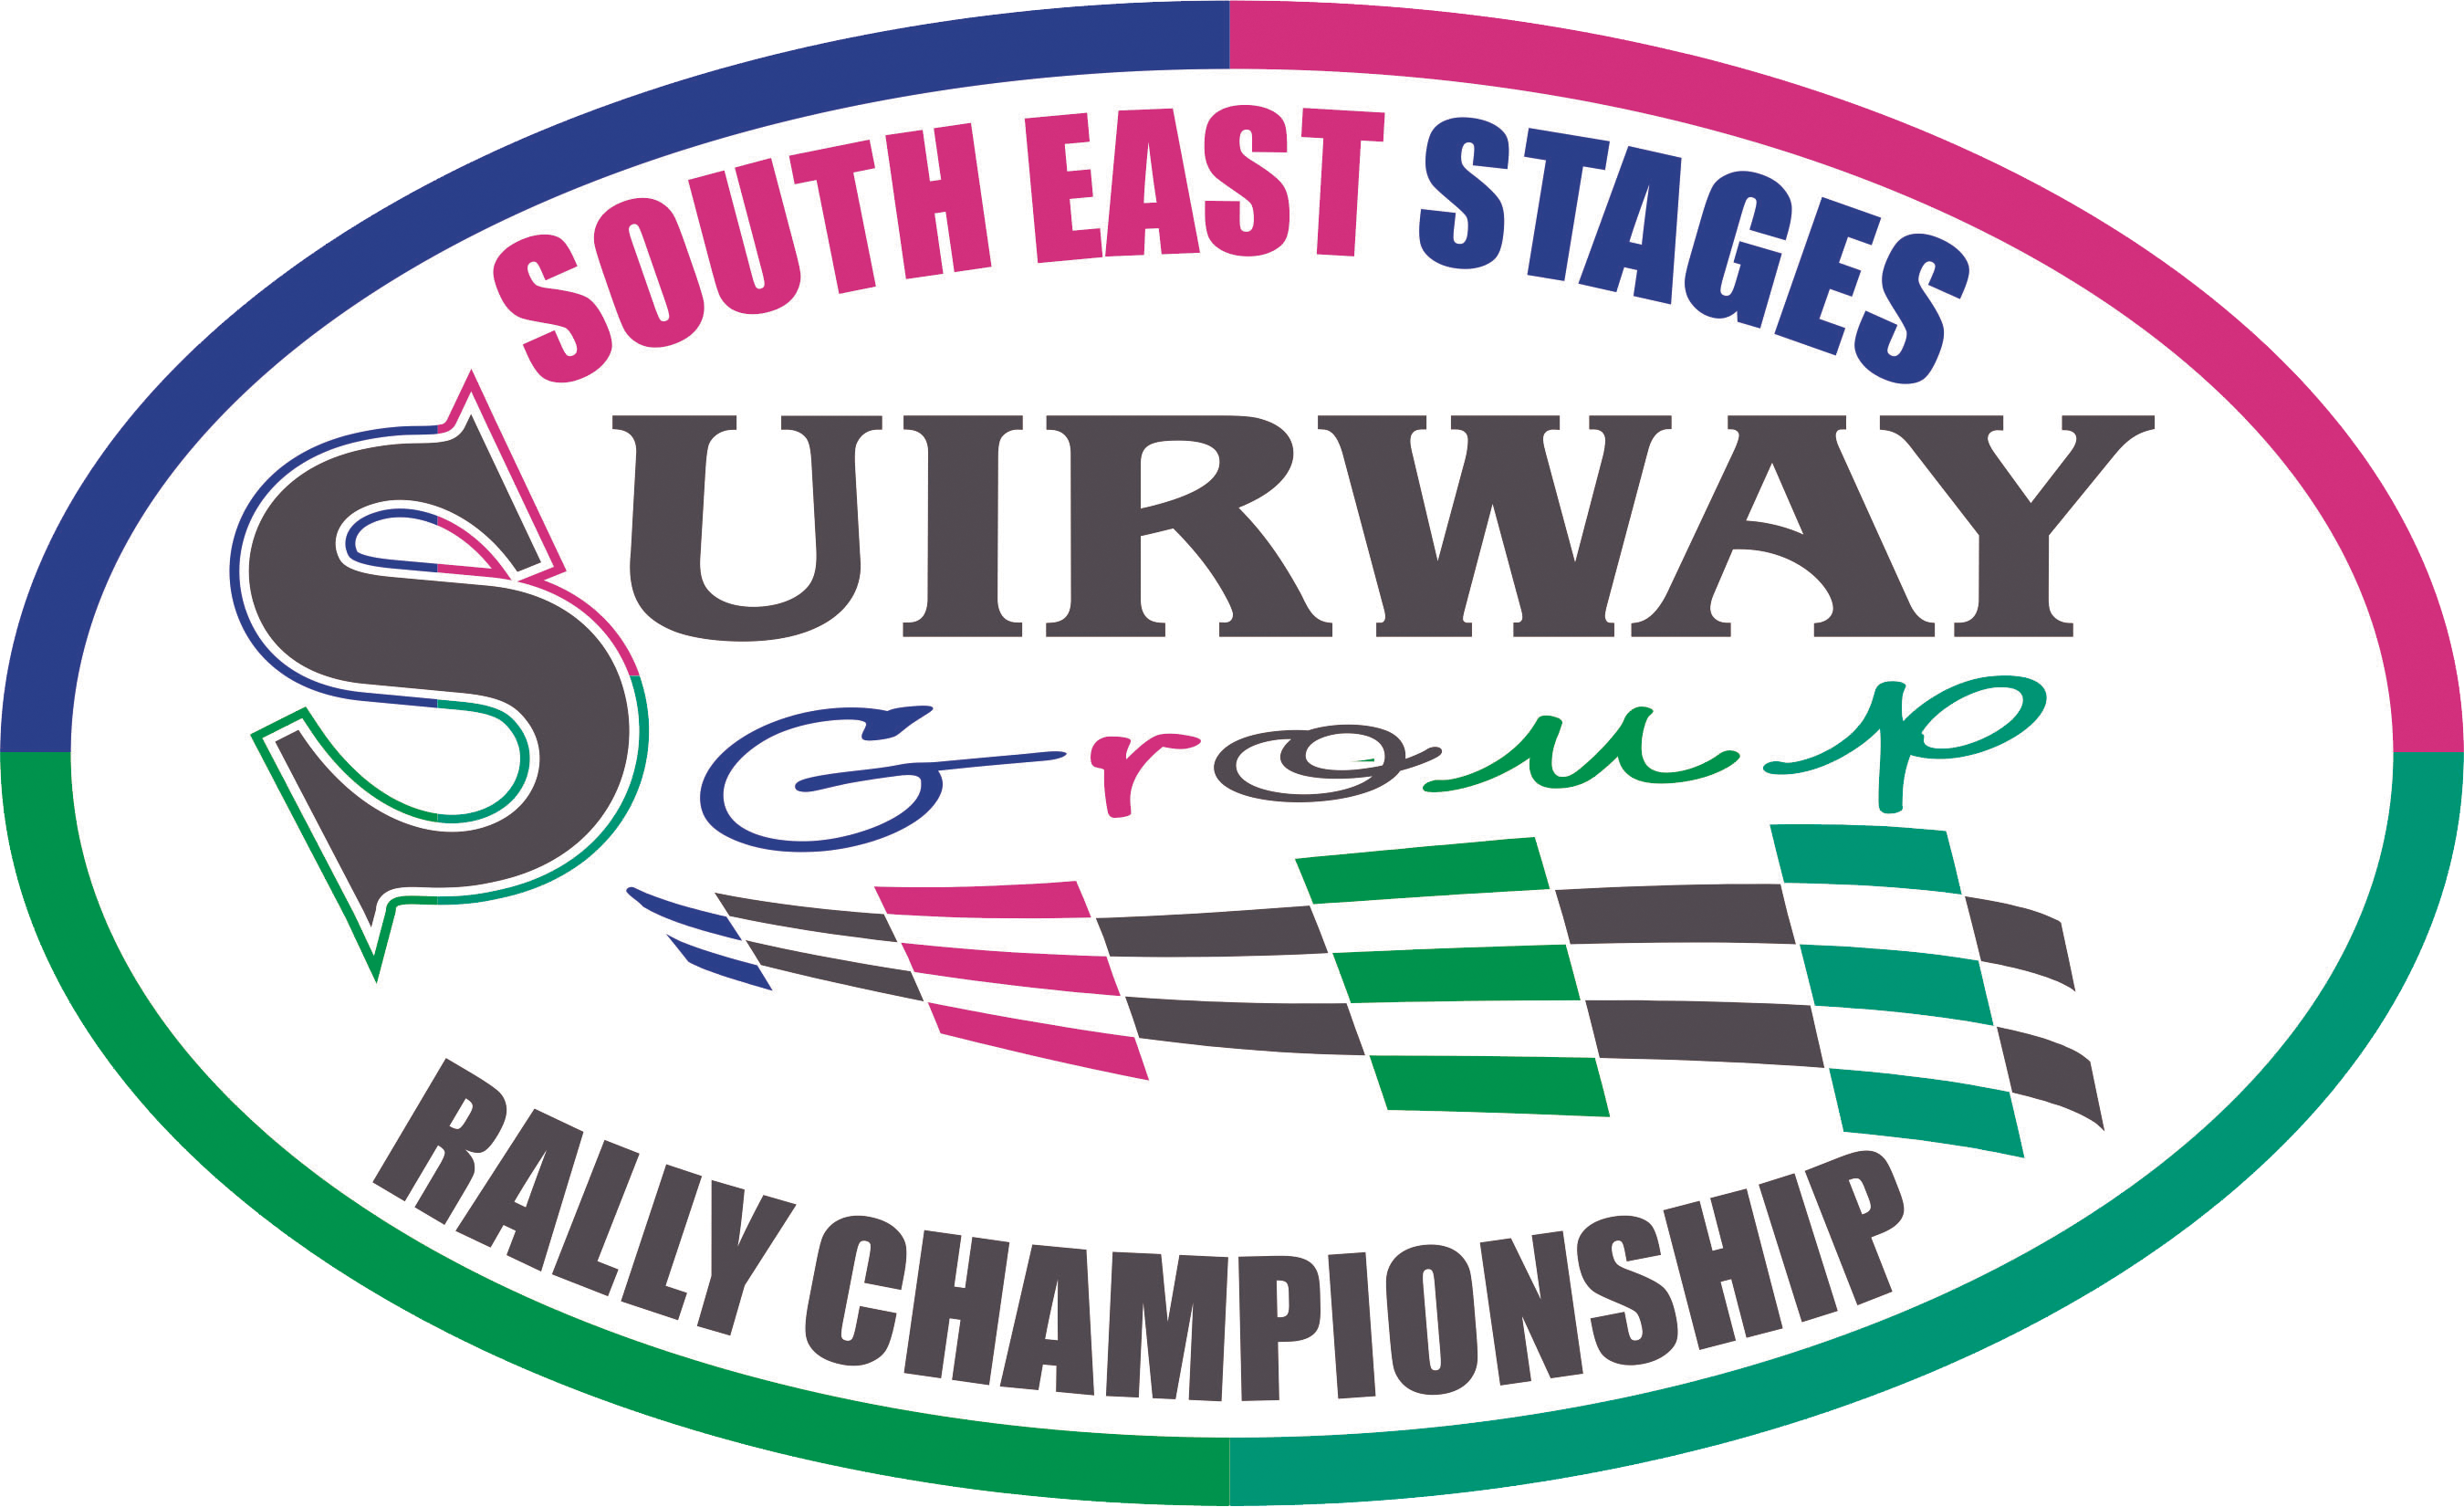 South East Stages Rally Championship